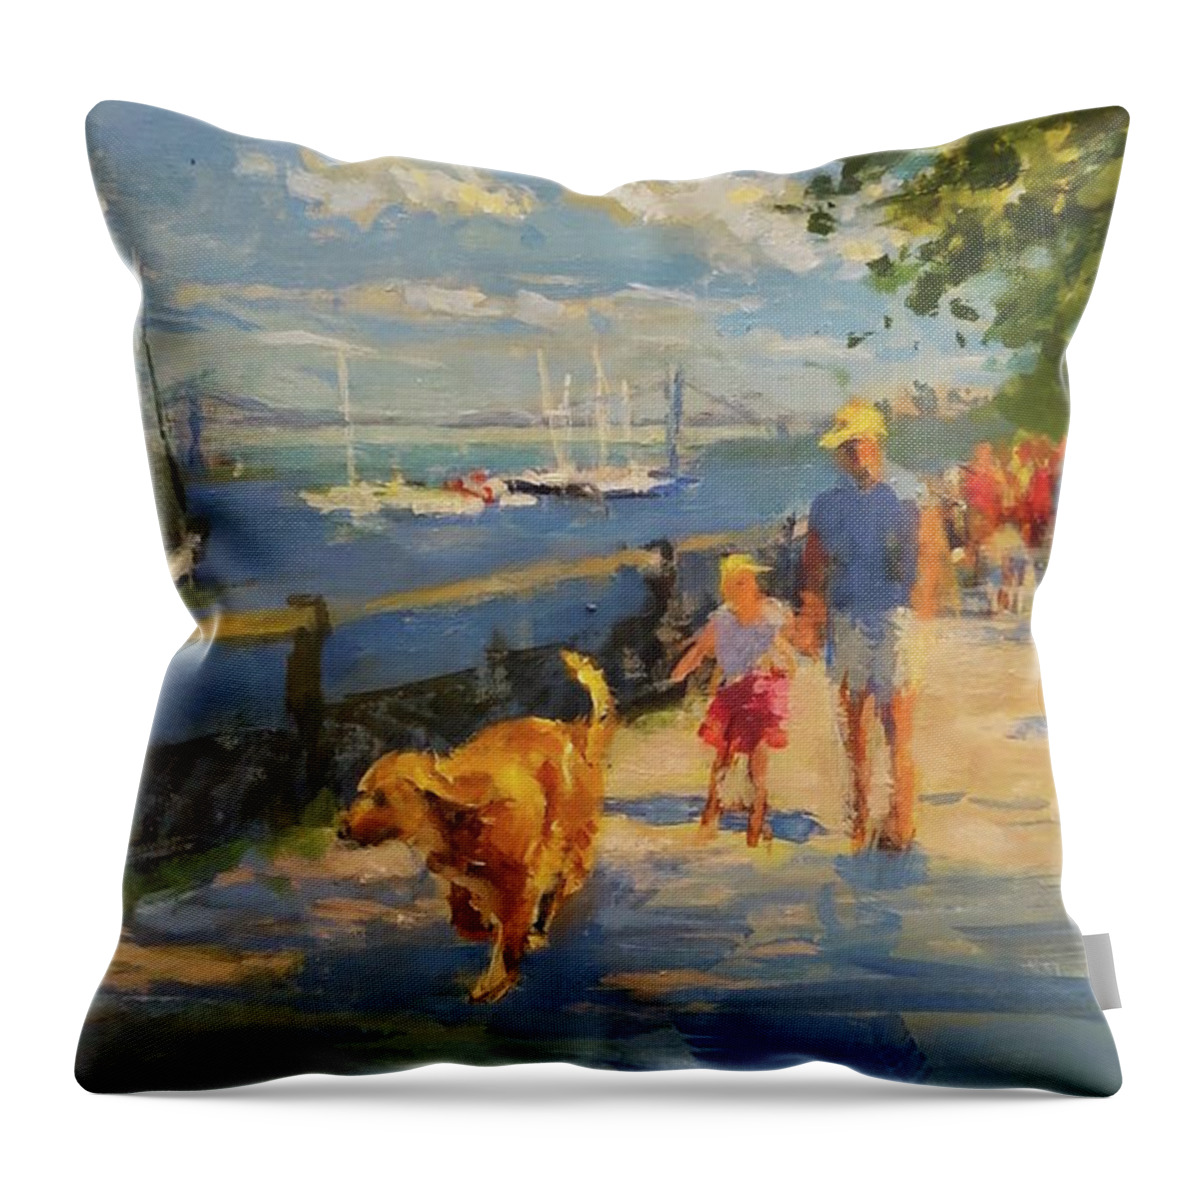 New York Throw Pillow featuring the painting By the River, Sunday Morning by Peter Salwen